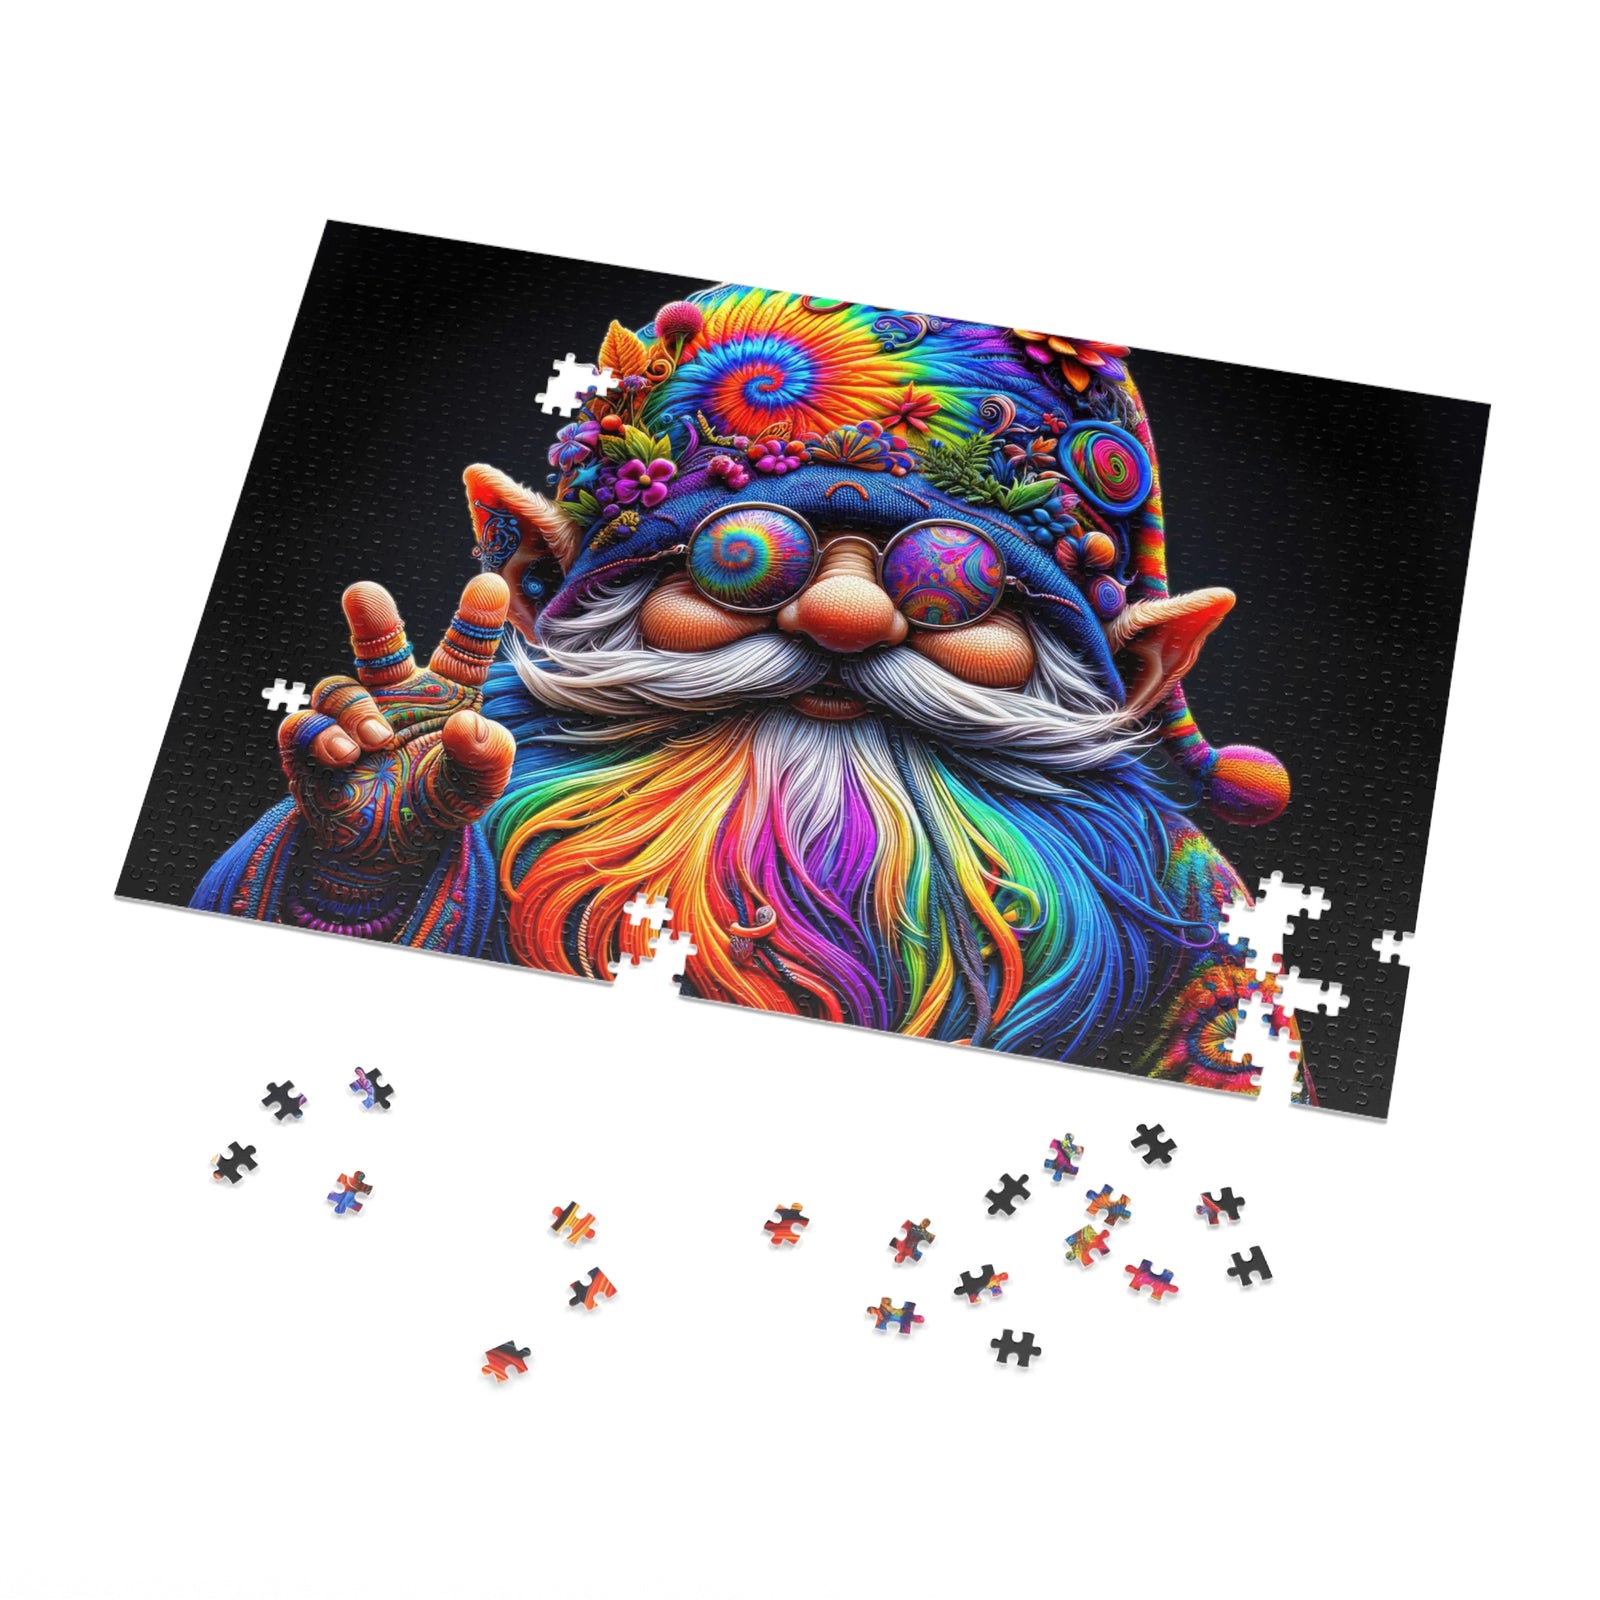 The Groovy Guardian of the Enchanted Garden Jigsaw Puzzle